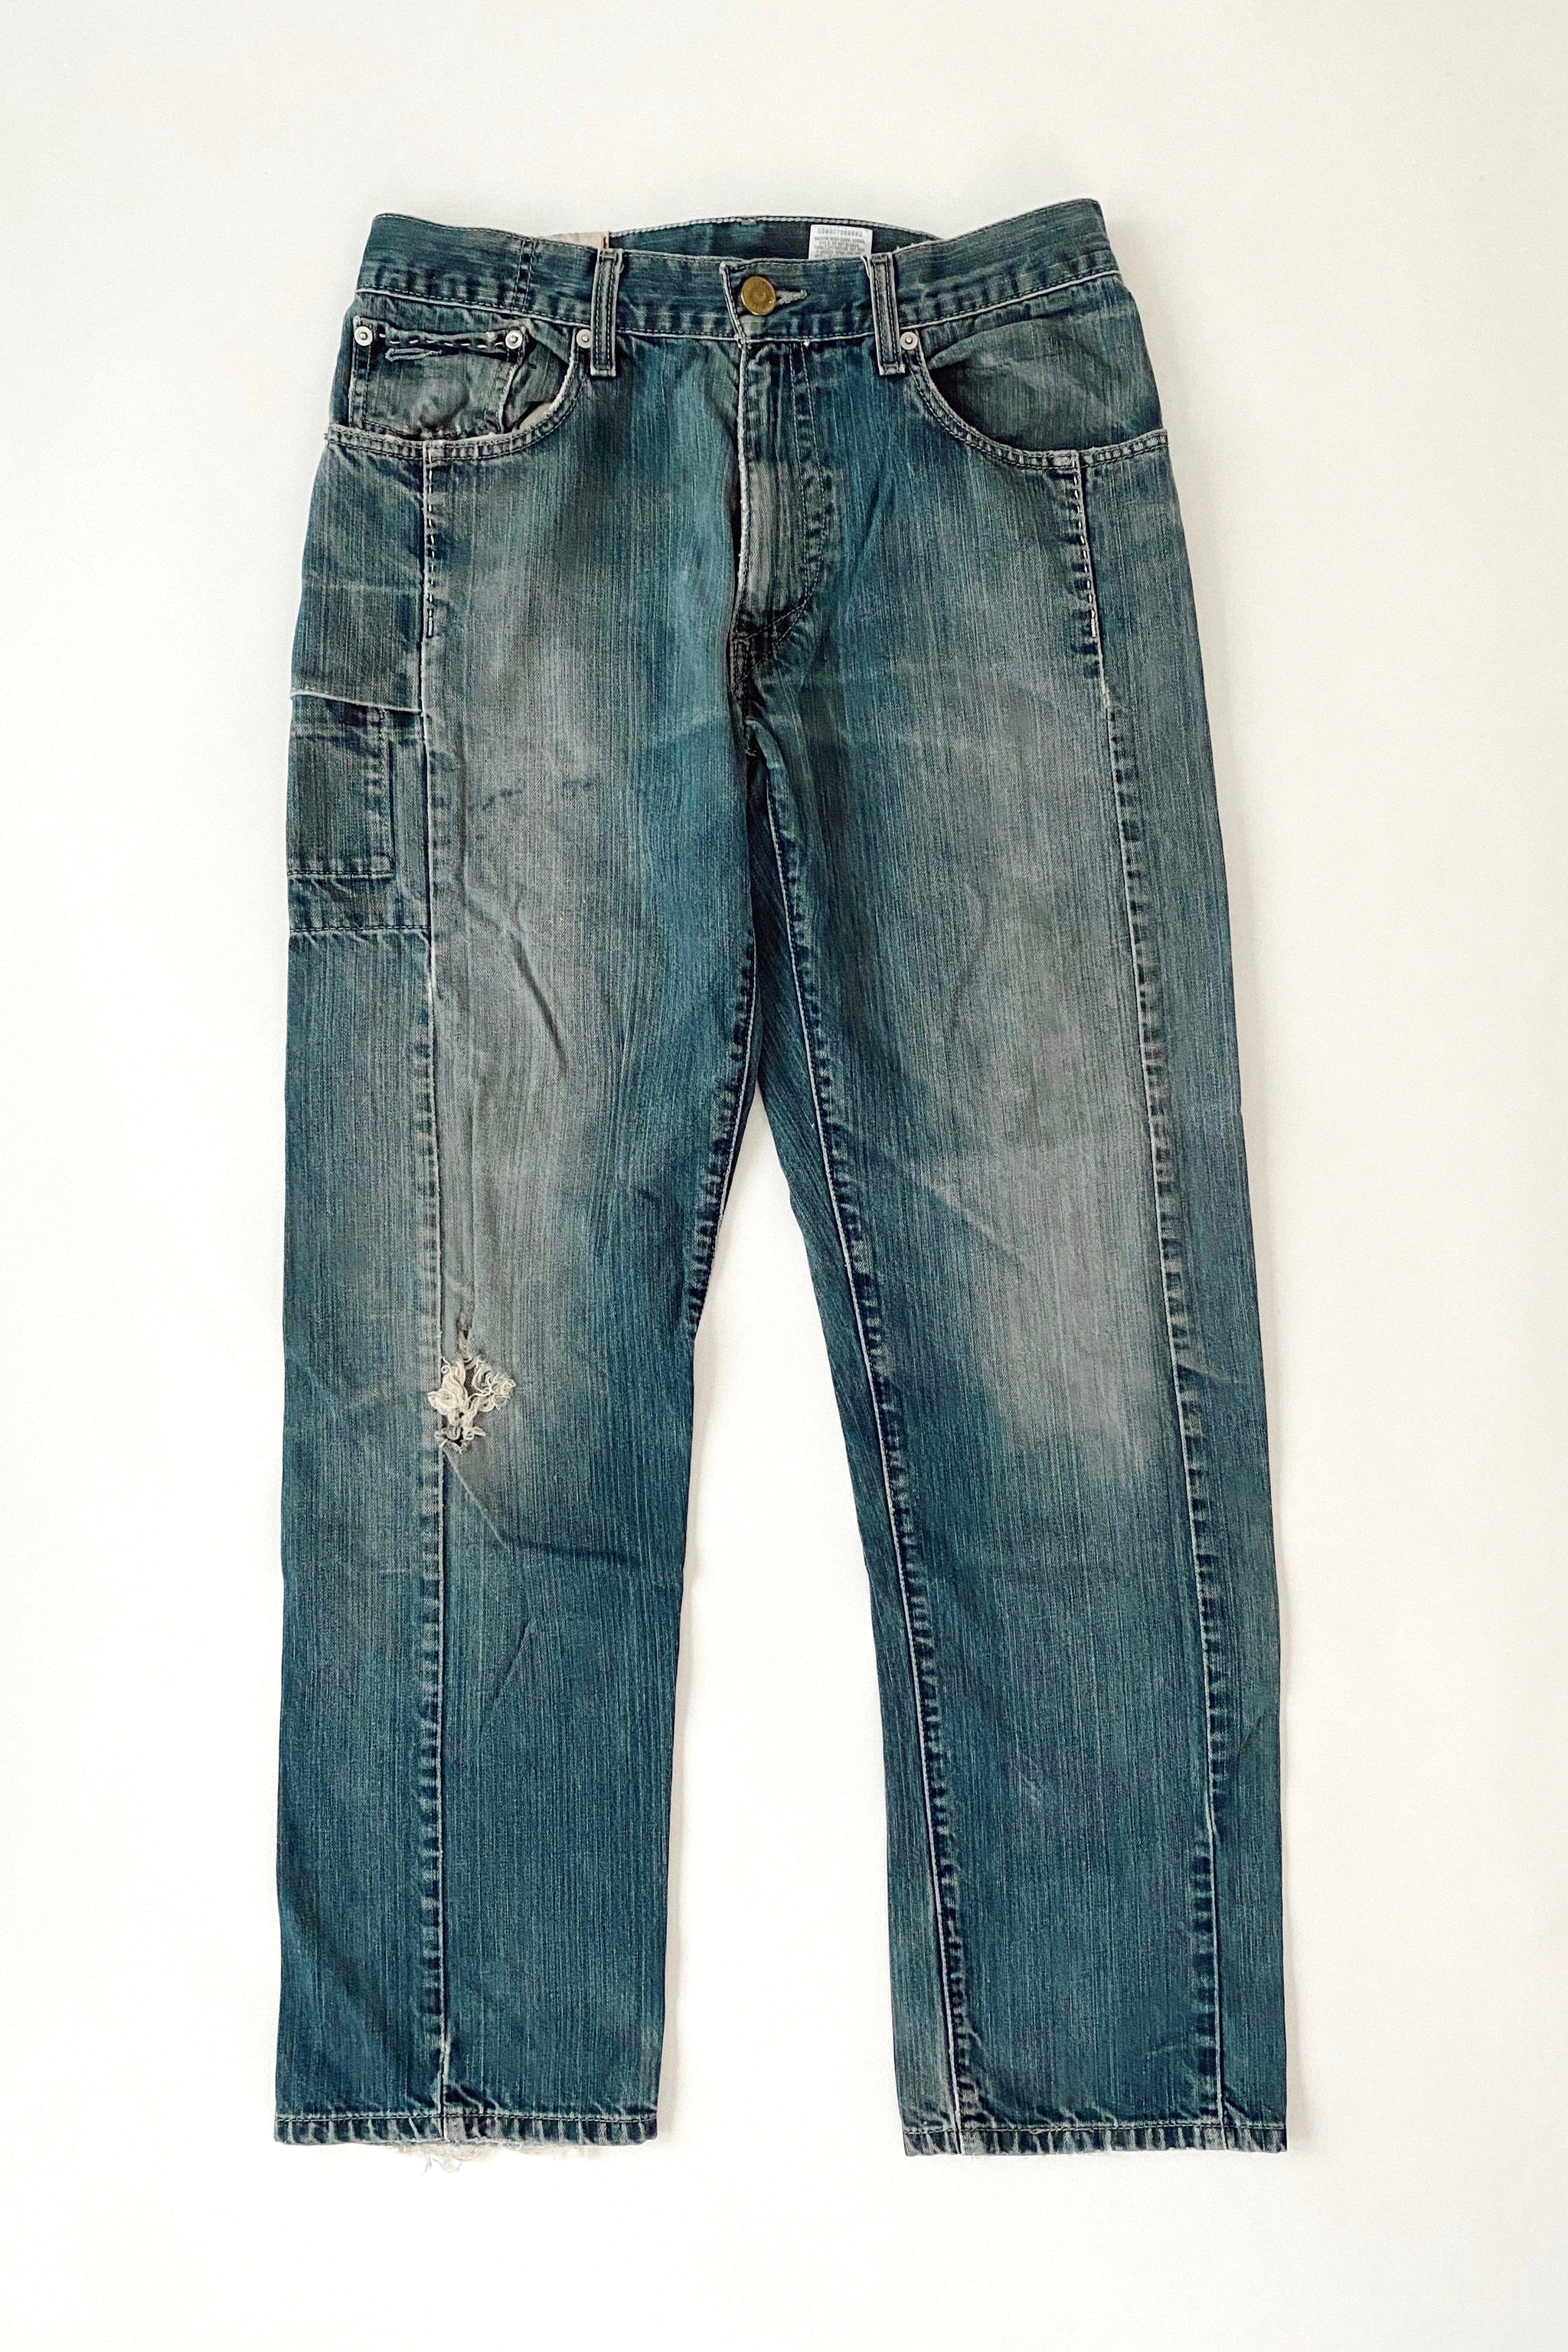 2006 Levi's RedWire Jeans / Size 30 - COUTONIC